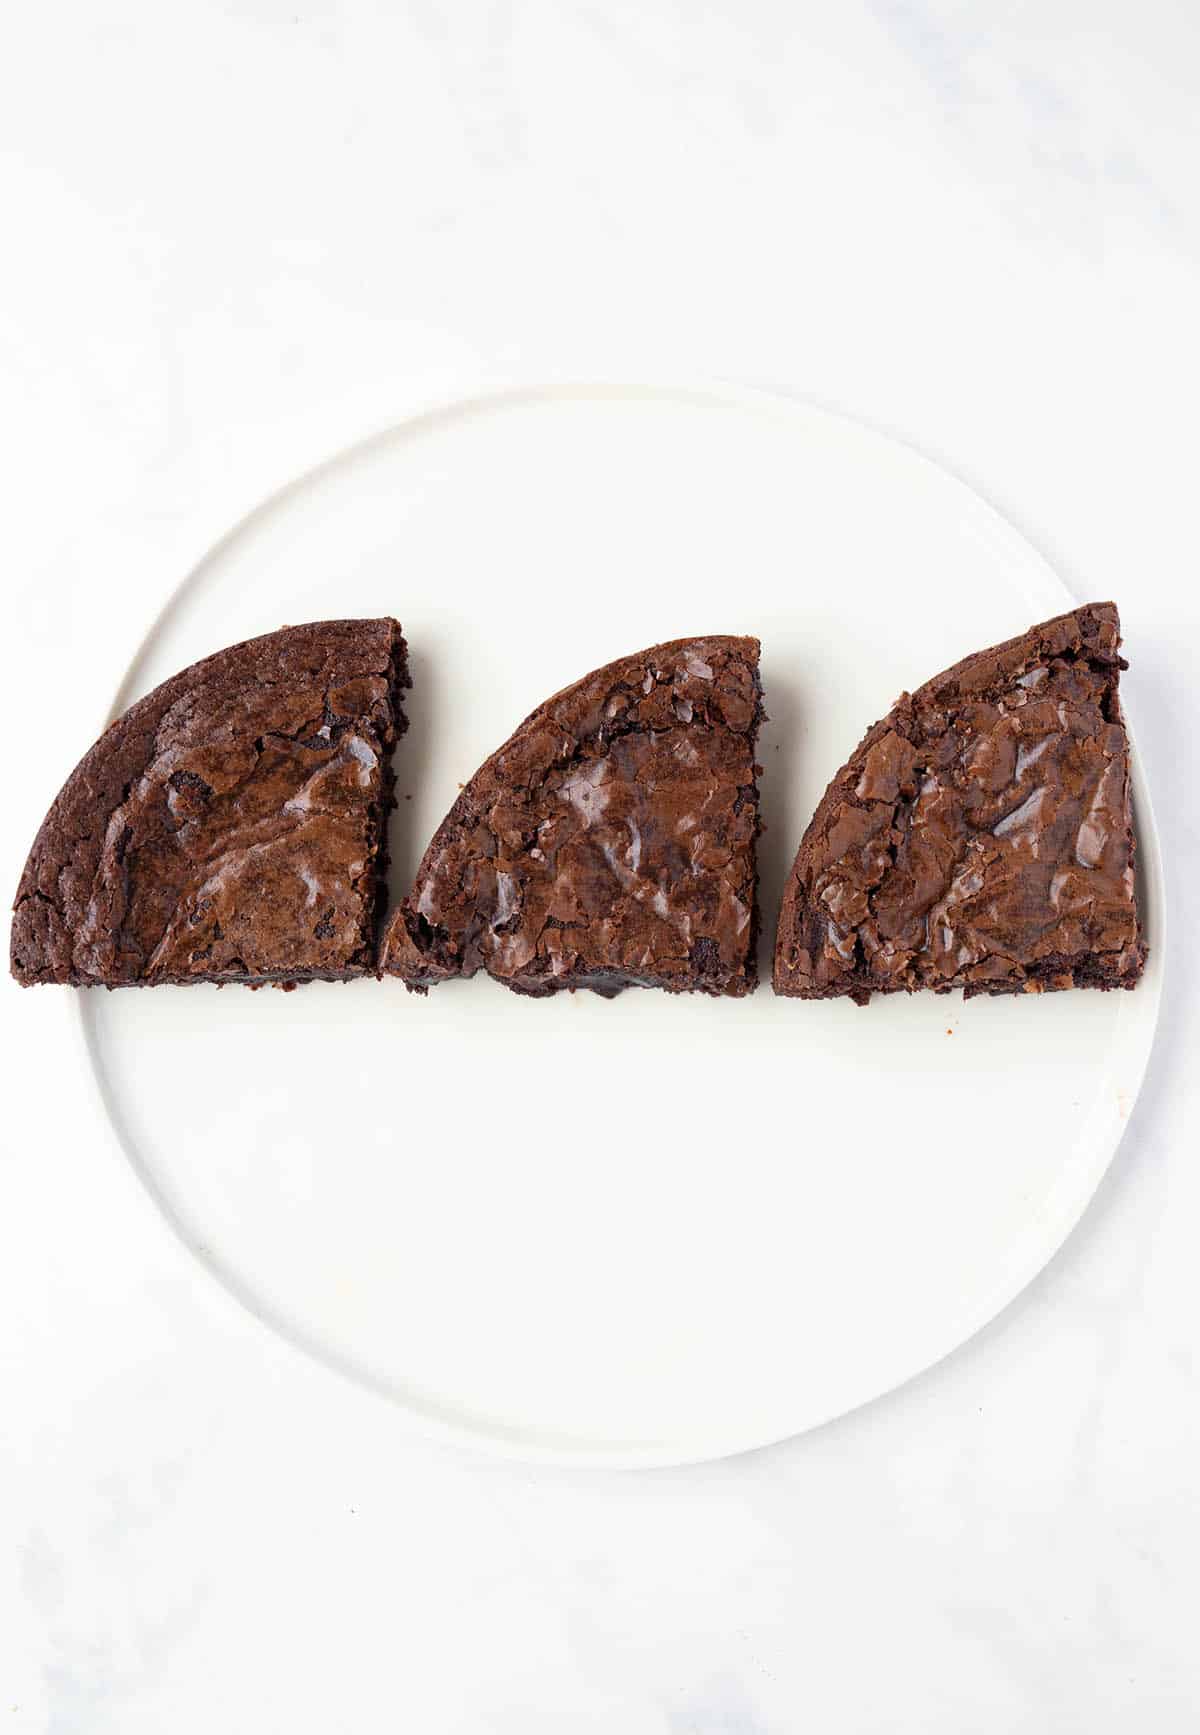 Three different brownies on a plate, side by site comparision.